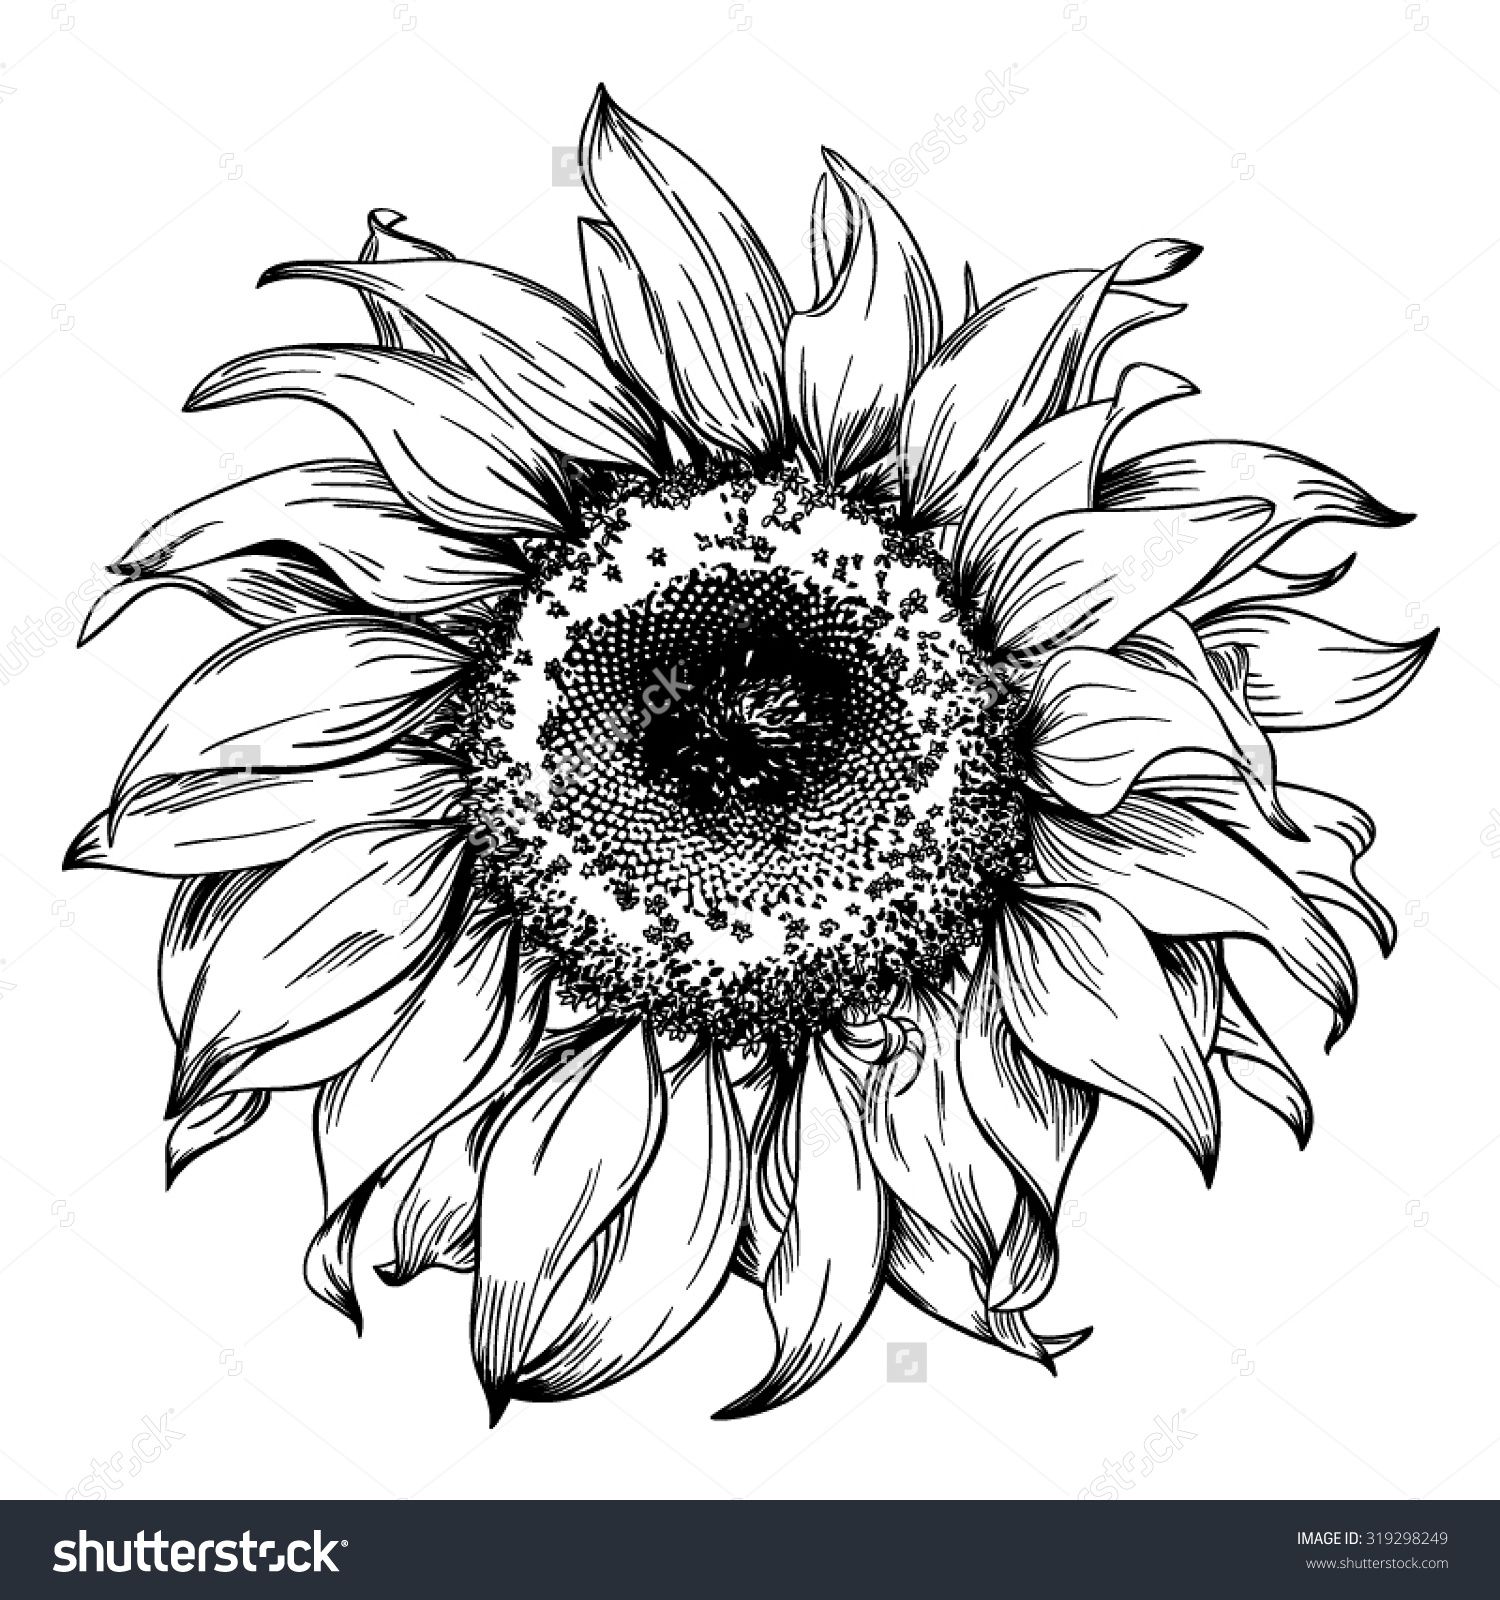 Hand Drawn Realistic Vintage Sunflower Pen And Ink Drawing On ...